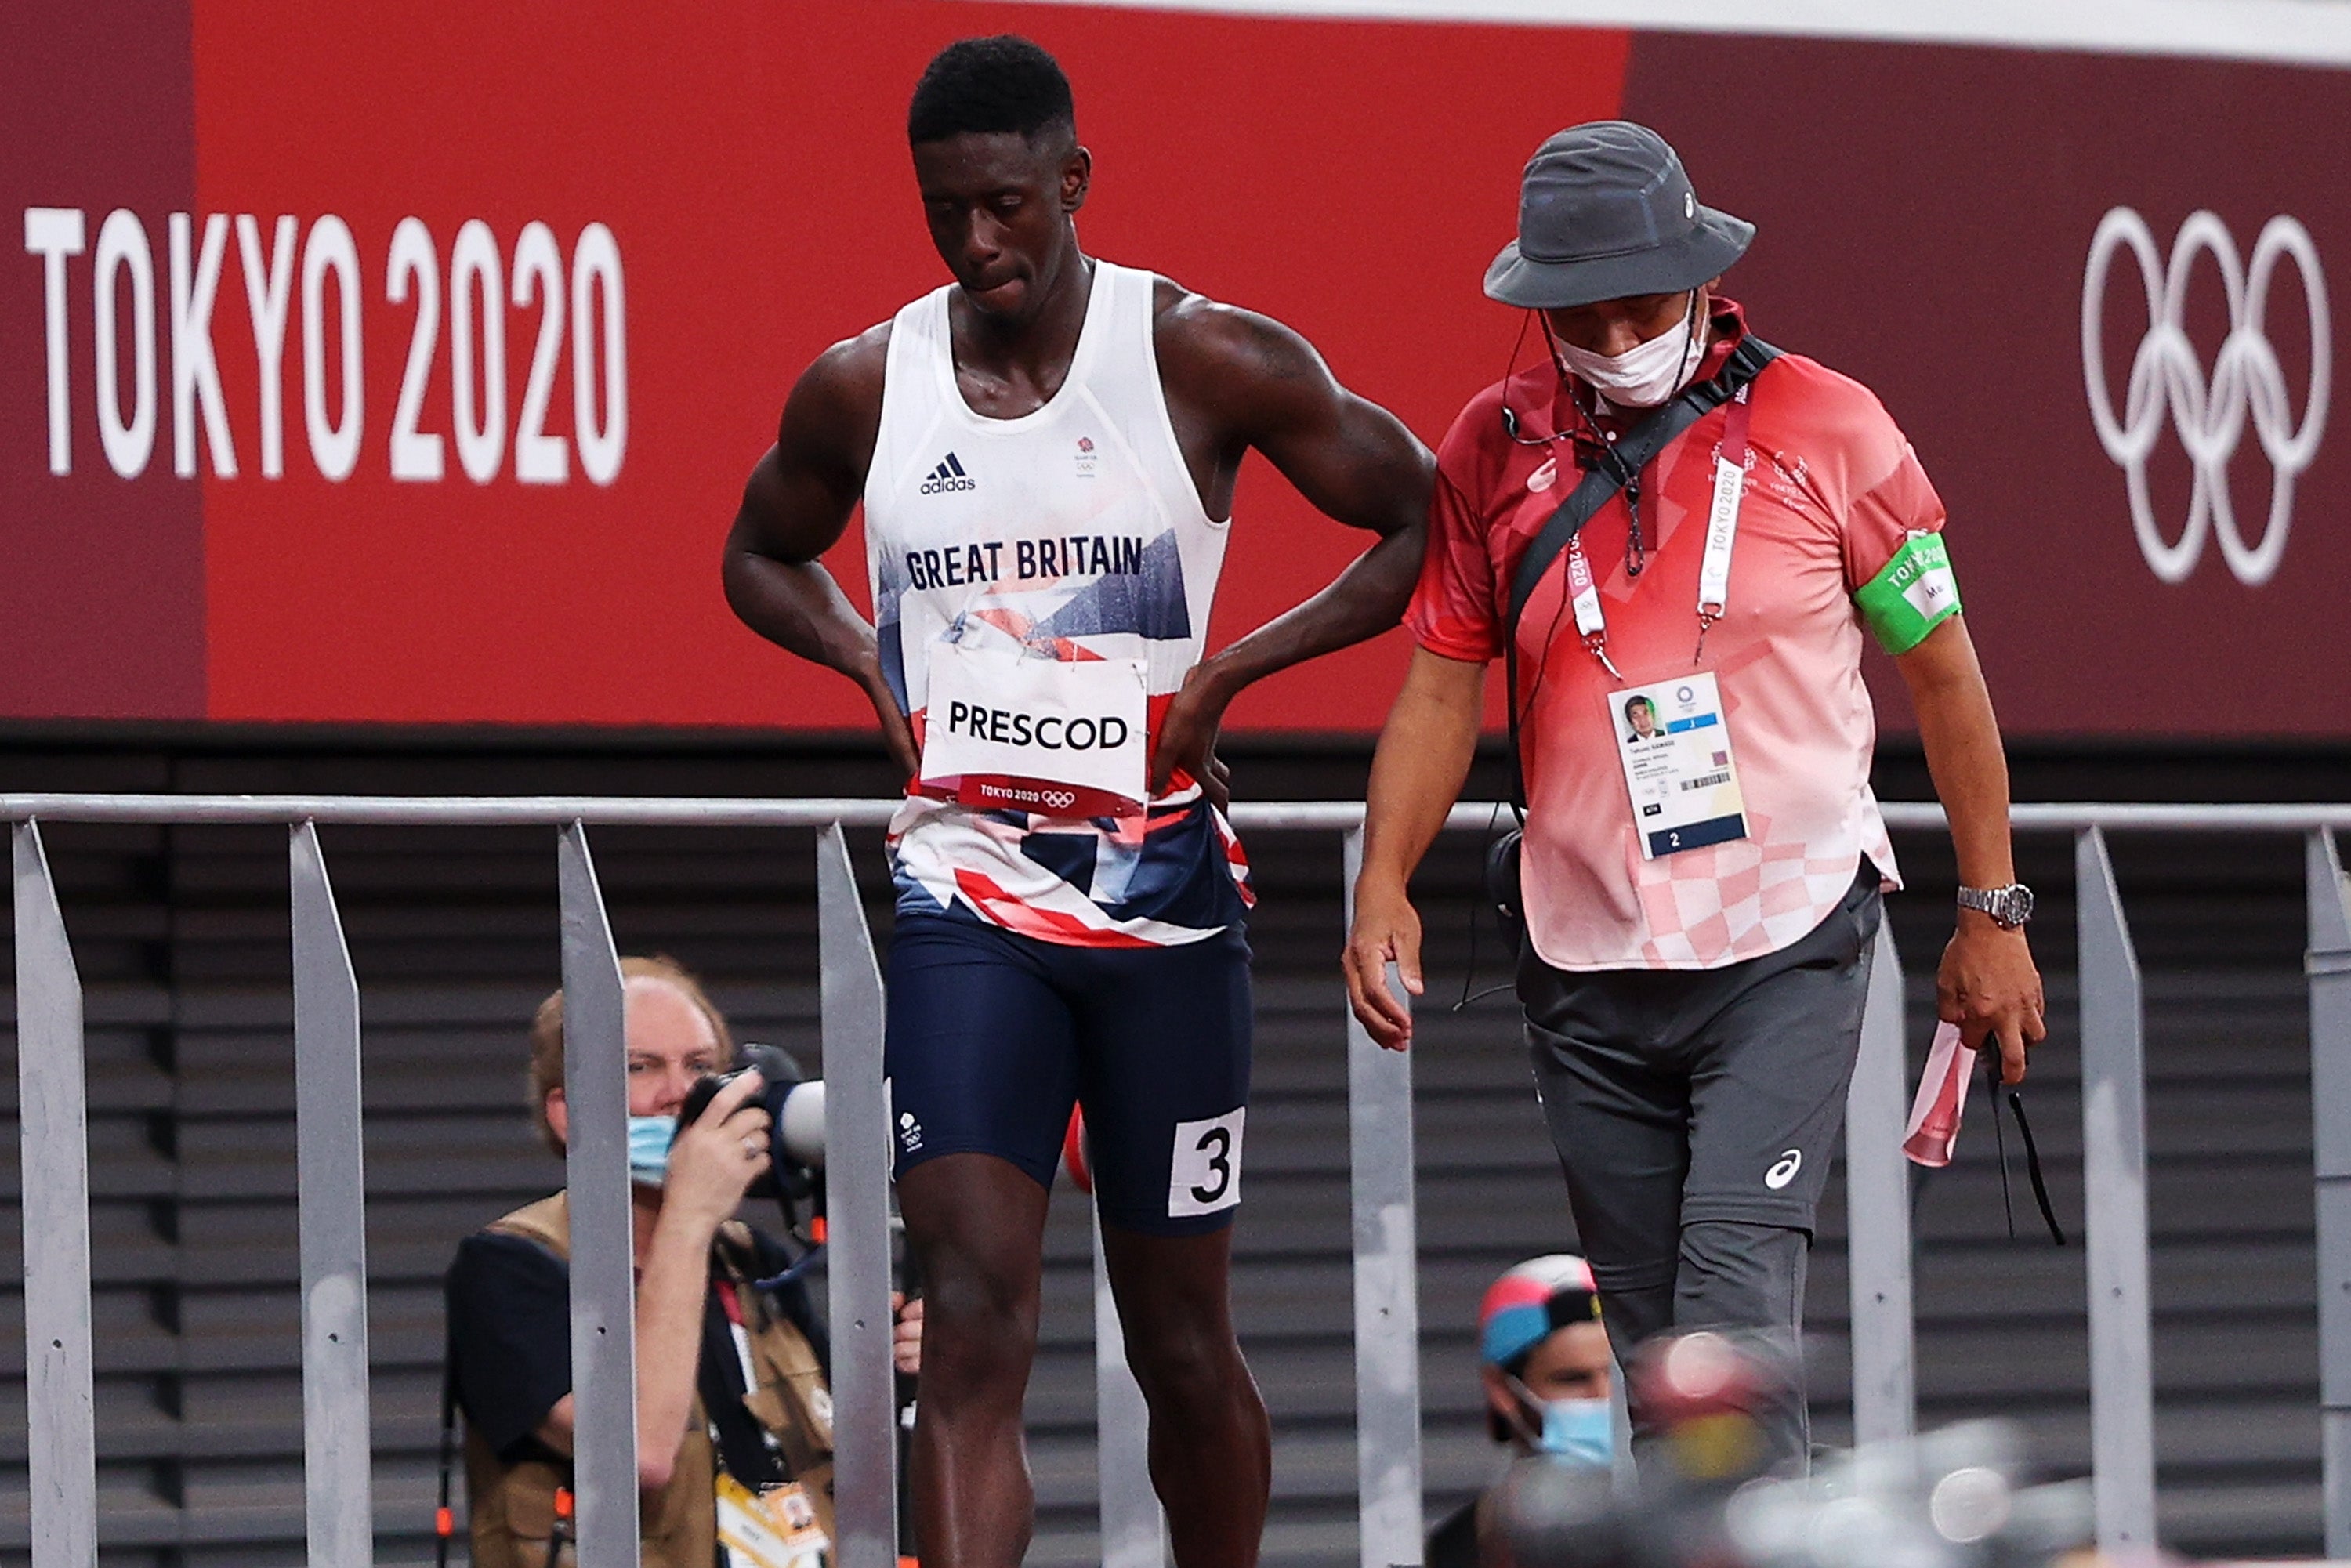 Prescod is accompanied from the track after his false start in Tokyo